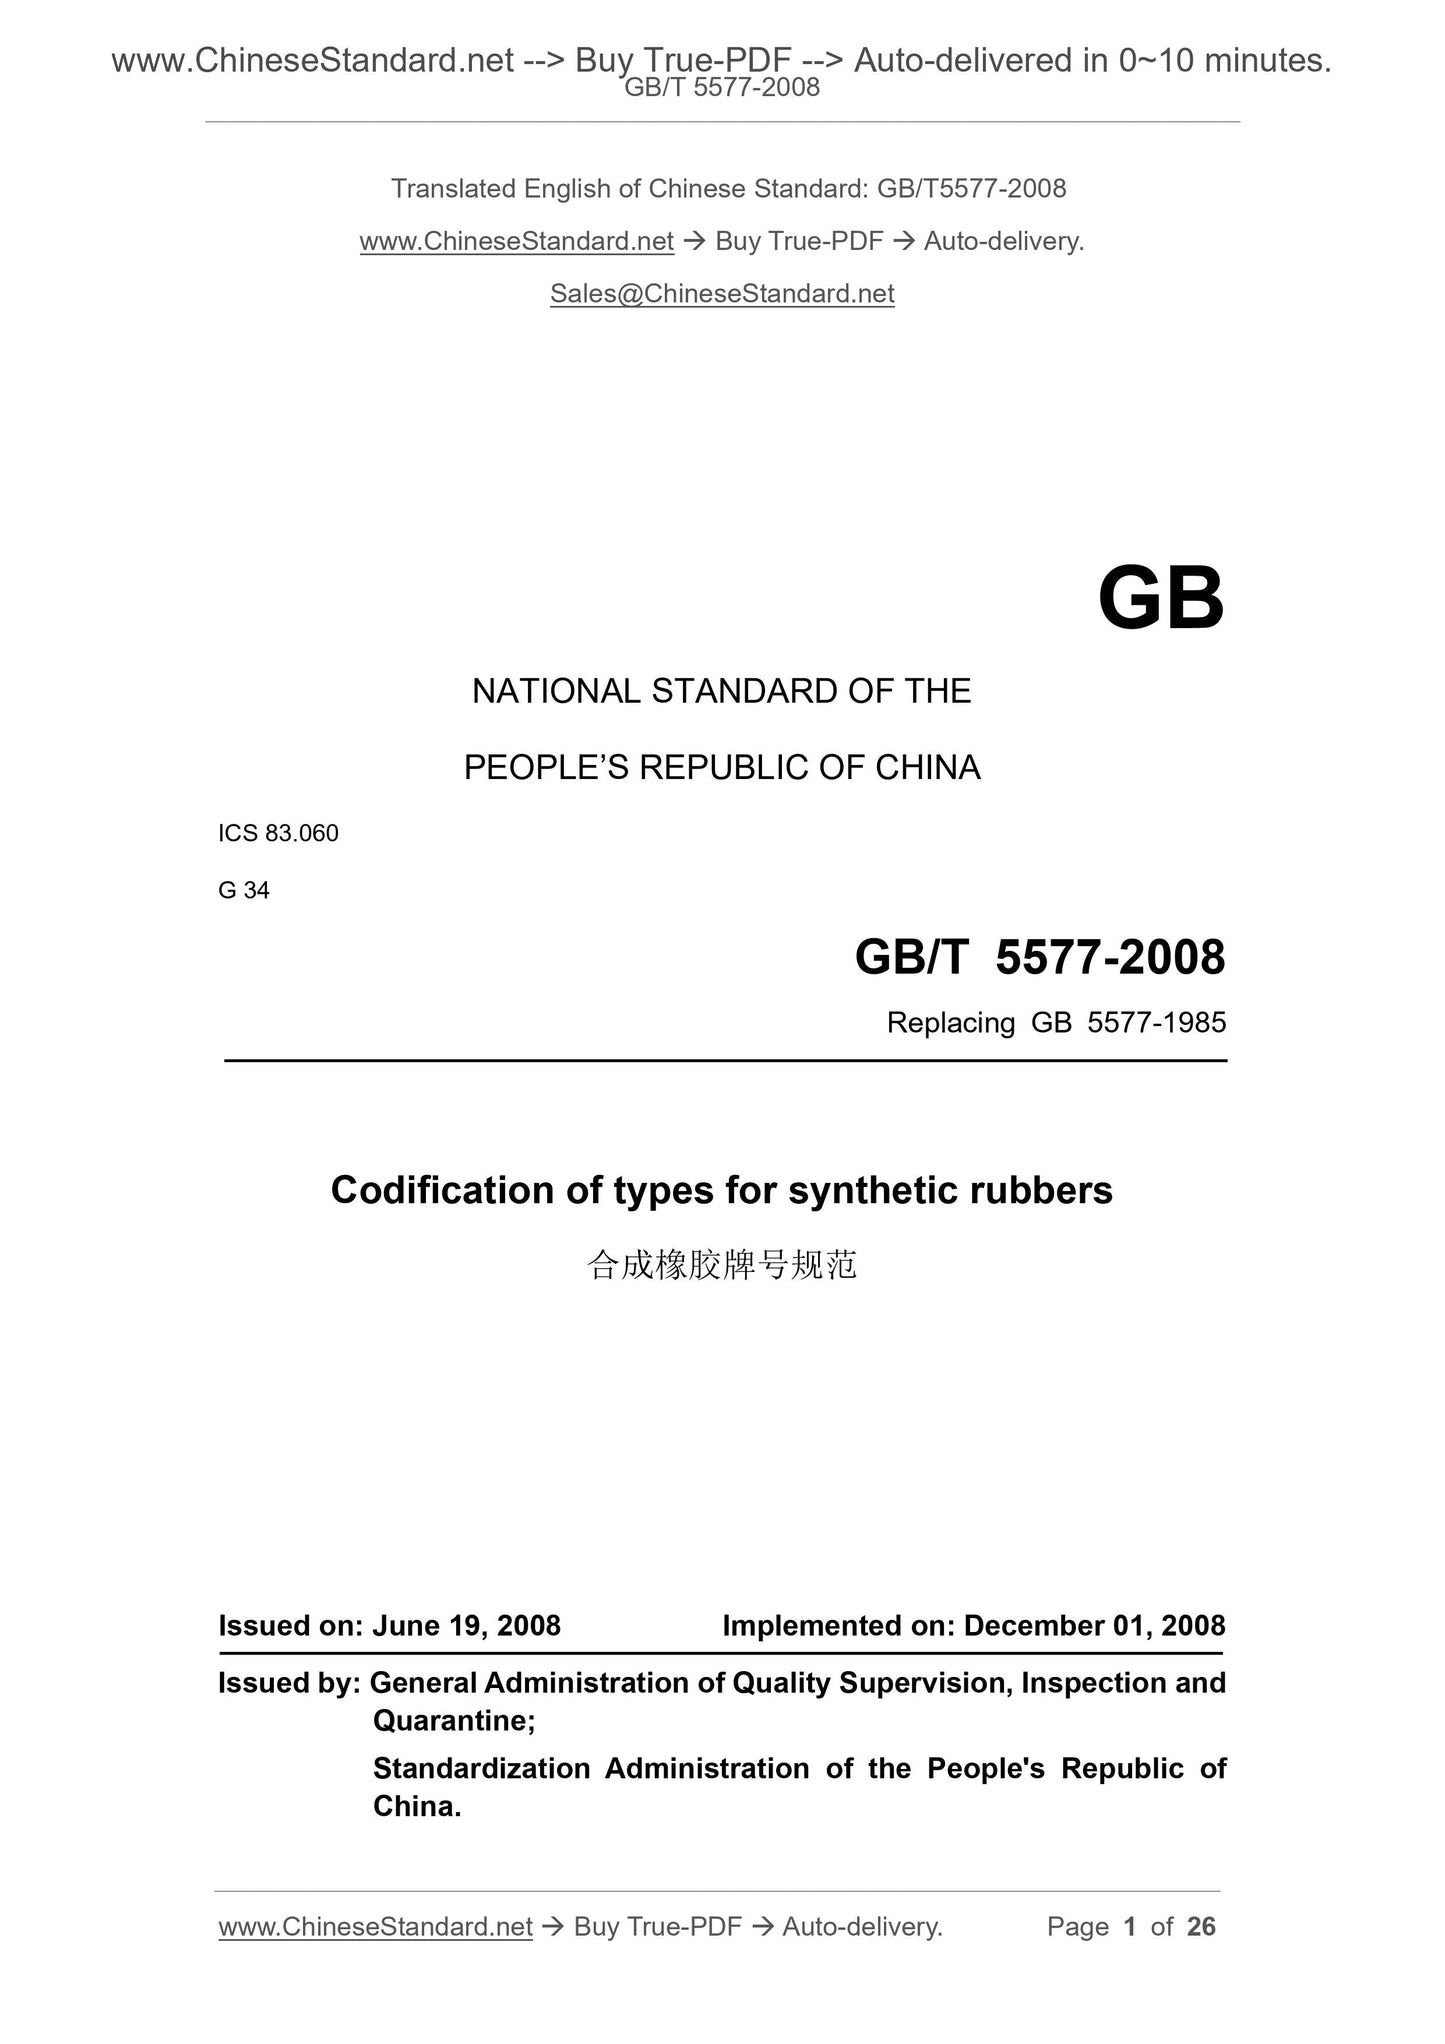 GB/T 5577-2008 Page 1